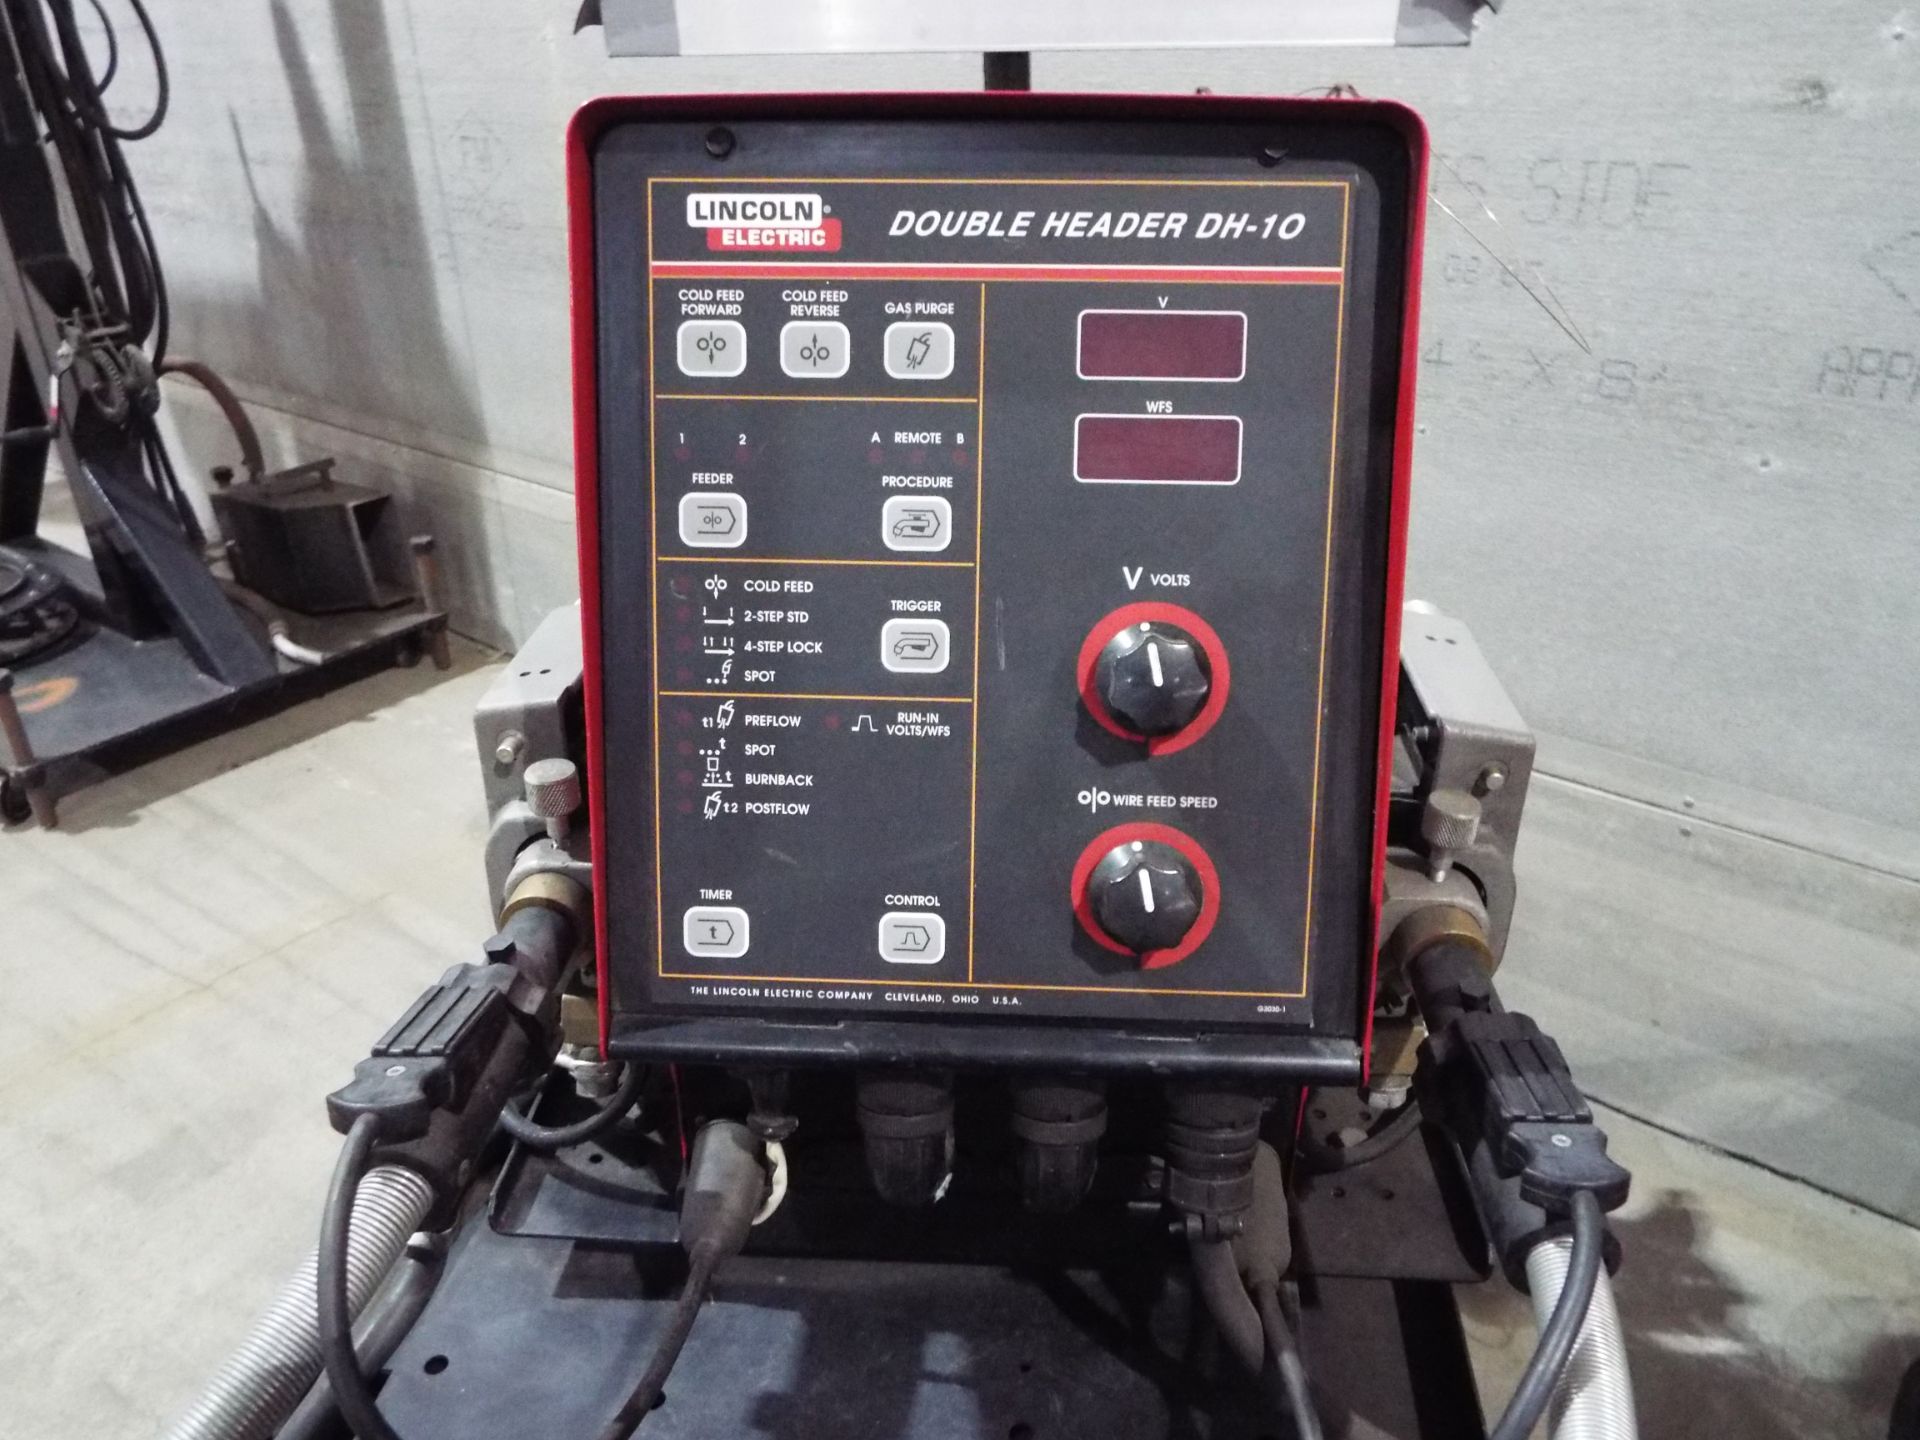 LINCOLN INVERTEC V350-PRO PORTABLE MULTI-PROCESS DIGITAL WELDER WITH LINCOLN DOUBLE HEADER DH-10 - Image 3 of 4